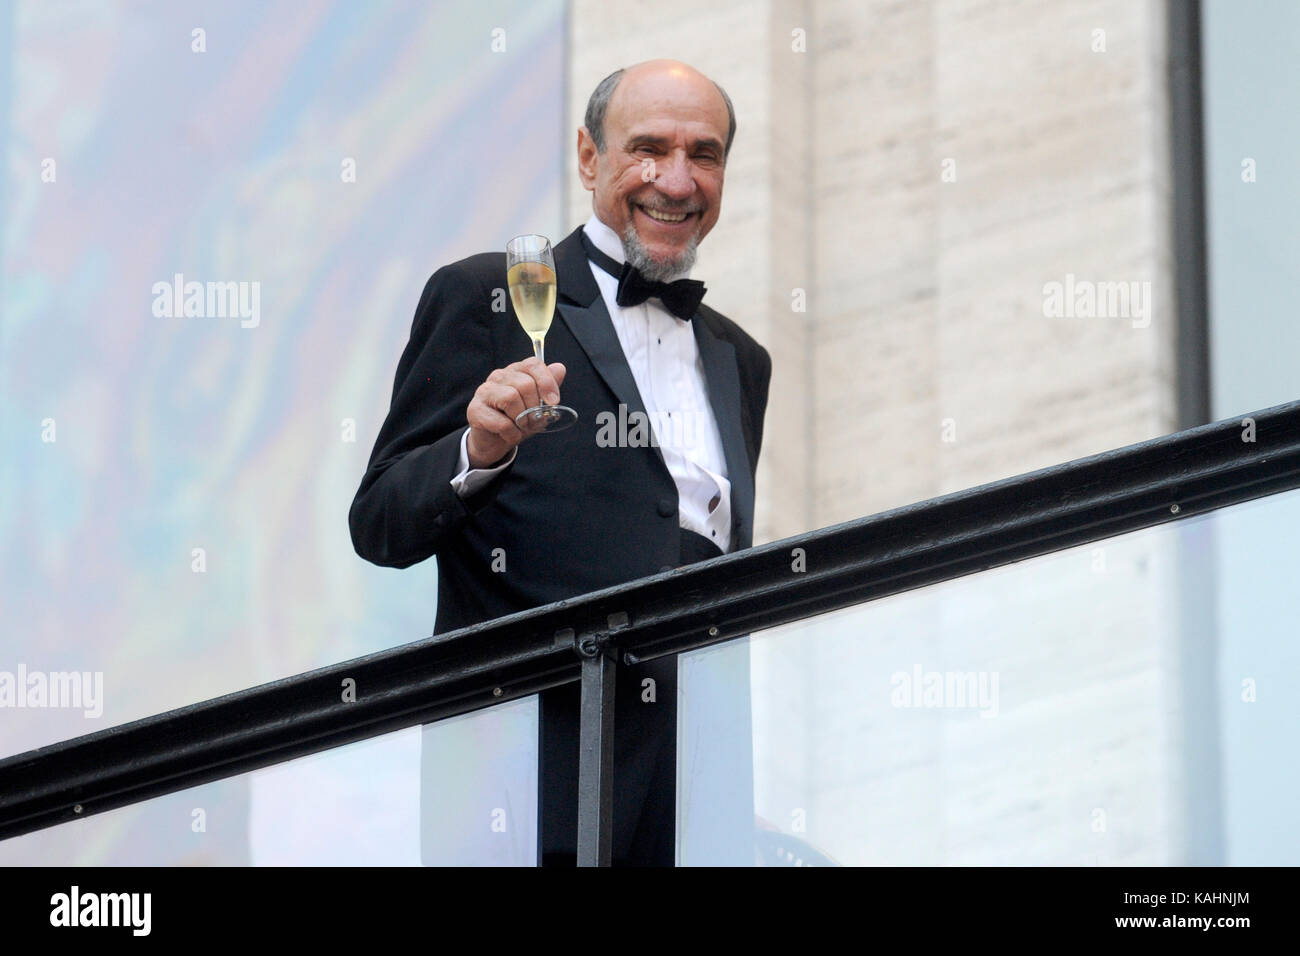 F. Murray Abraham attends the 2017 Metropolitan Opera Opening Night at The Metropolitan Opera House on September 25, 2017 in New York City. Stock Photo